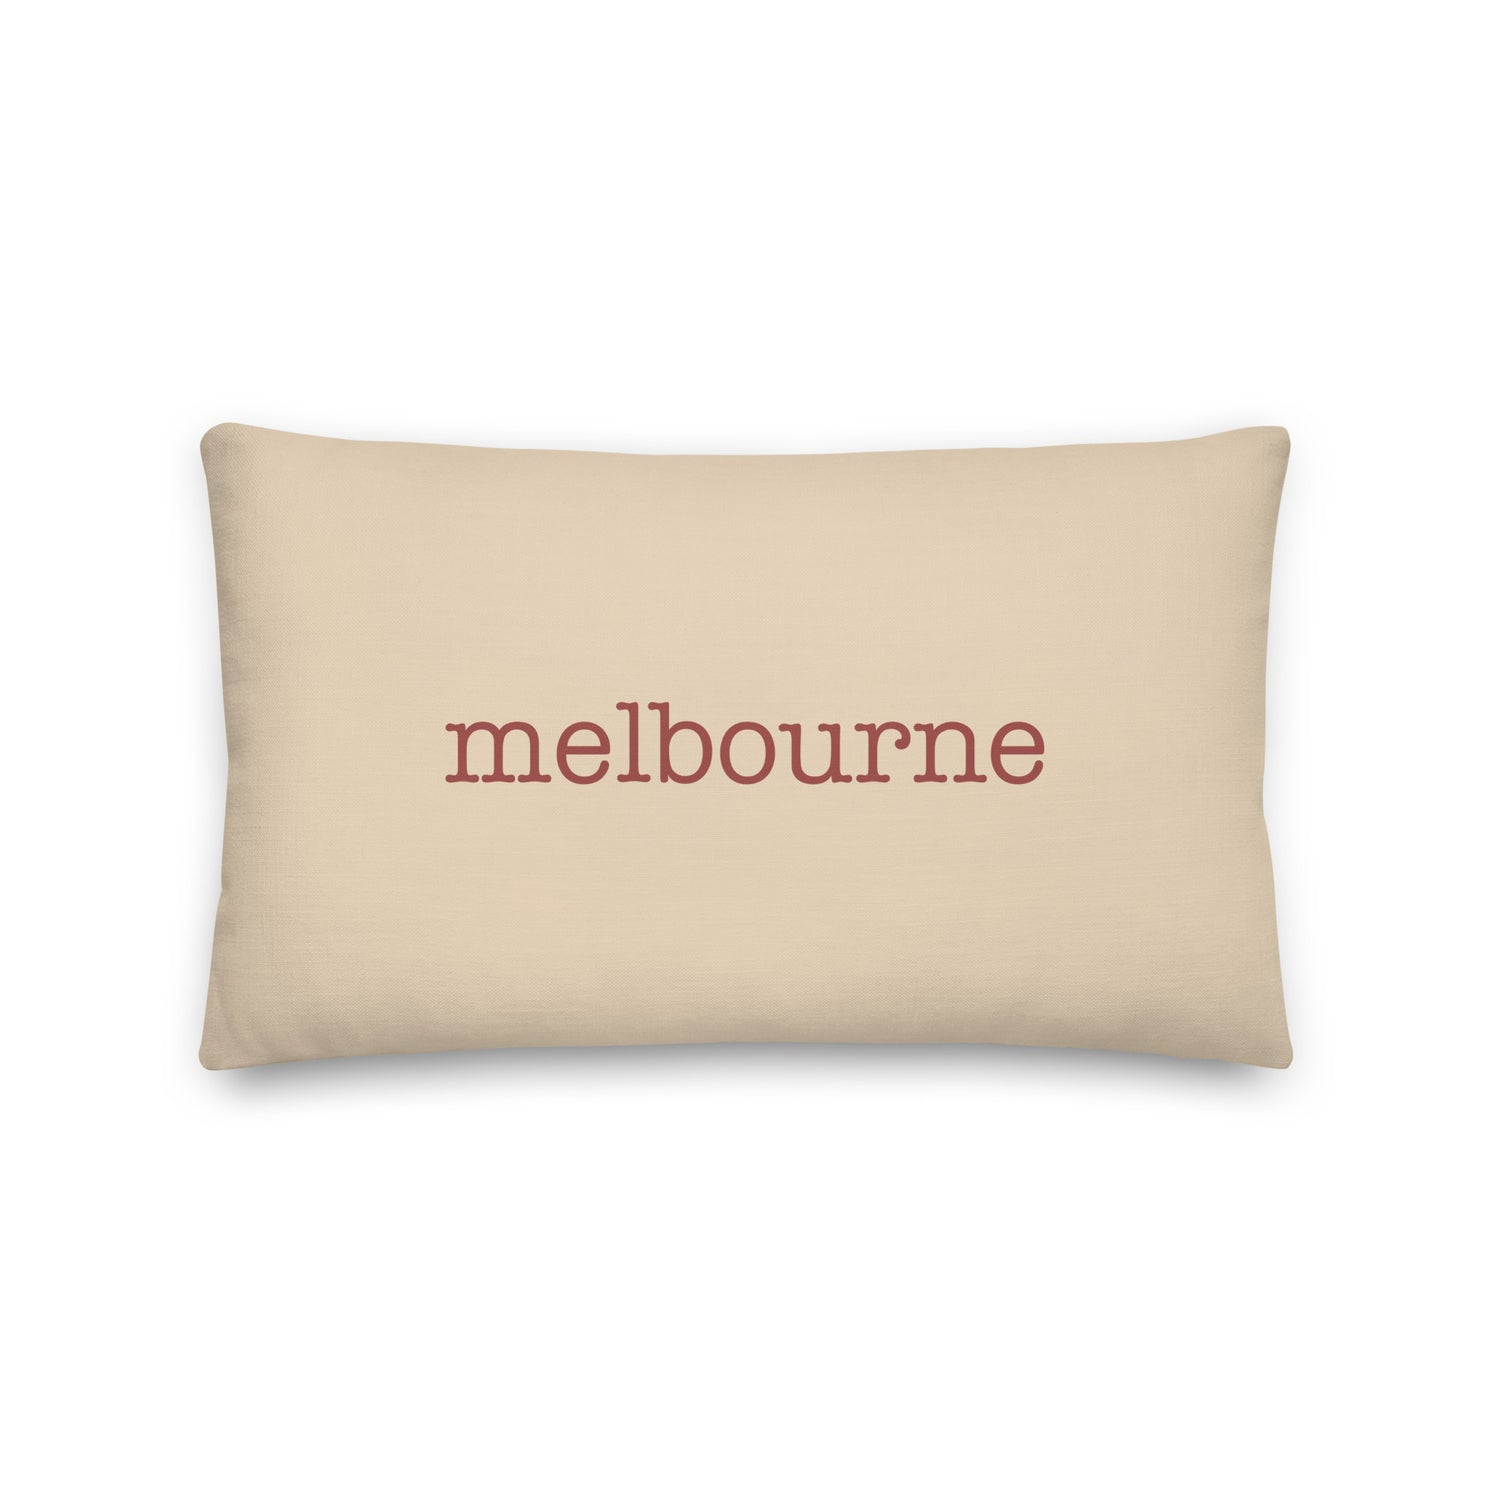 Melbourne Australia Pillows and Blankets • MEL Airport Code